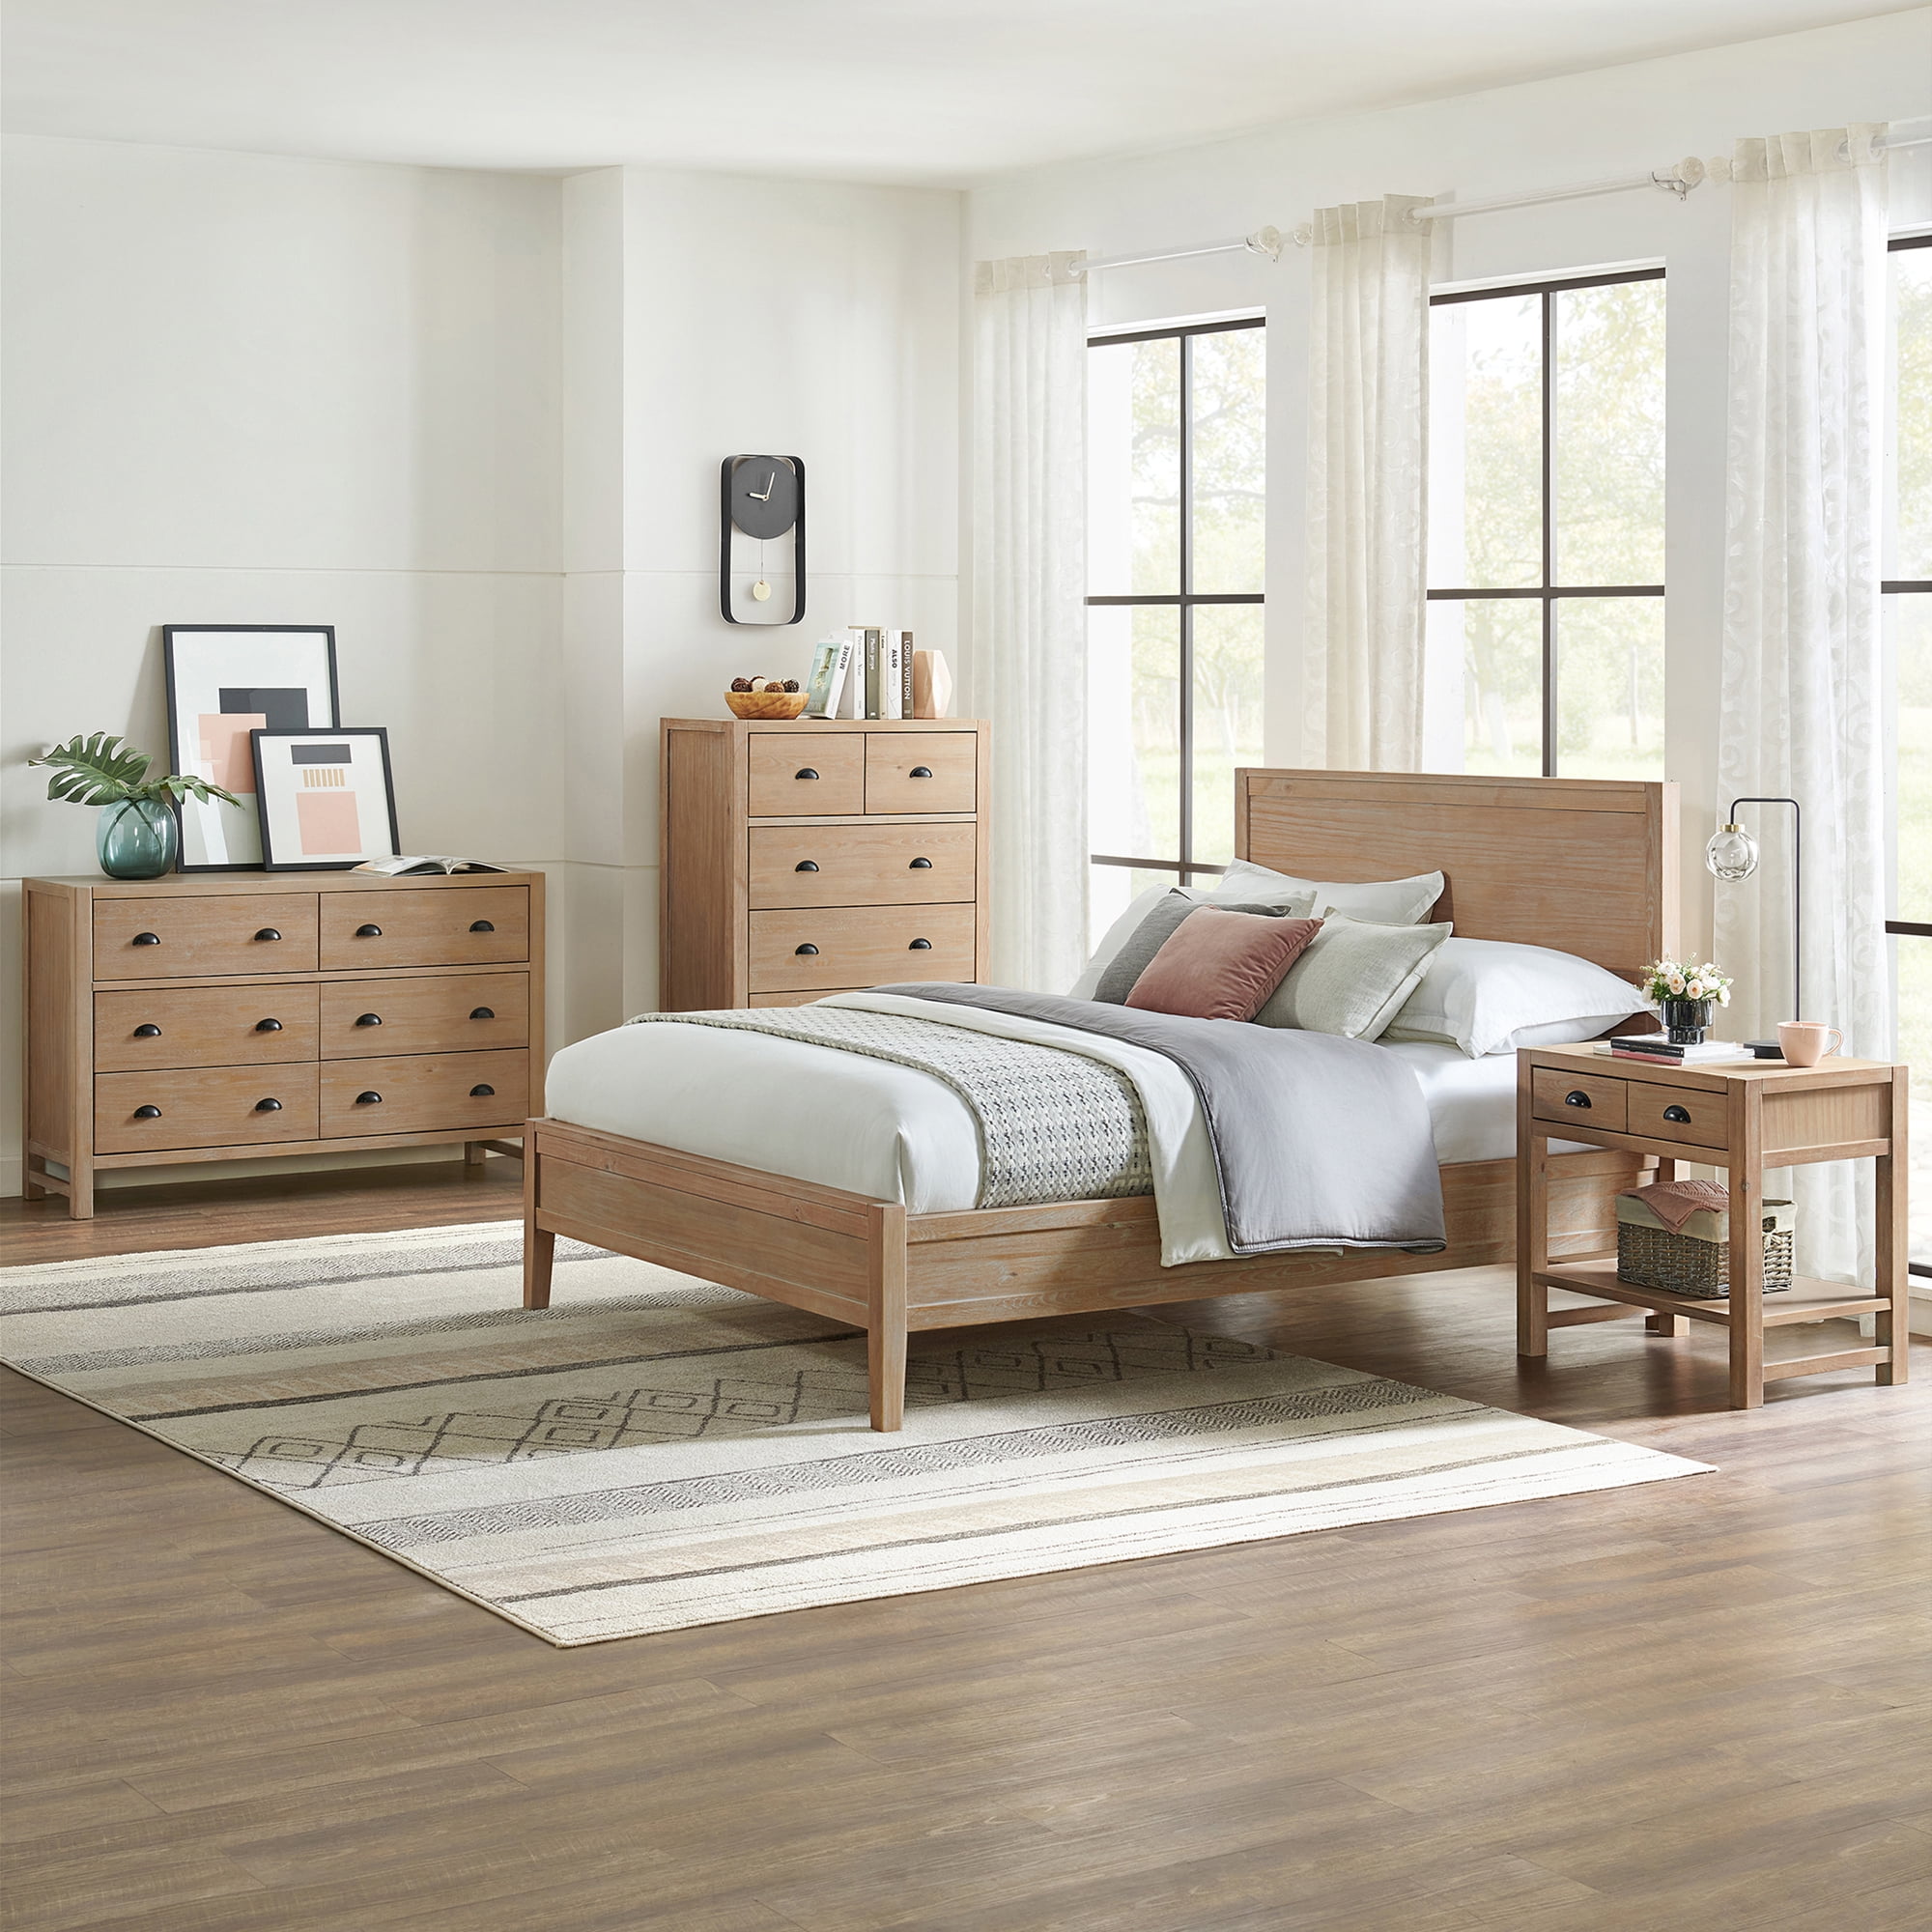 alaterre furniture arden 4-piece wood bedroom set with queen bed, 2-drawer nightstand with open shelf, 5-drawer chest, 6-drawer dresser, light